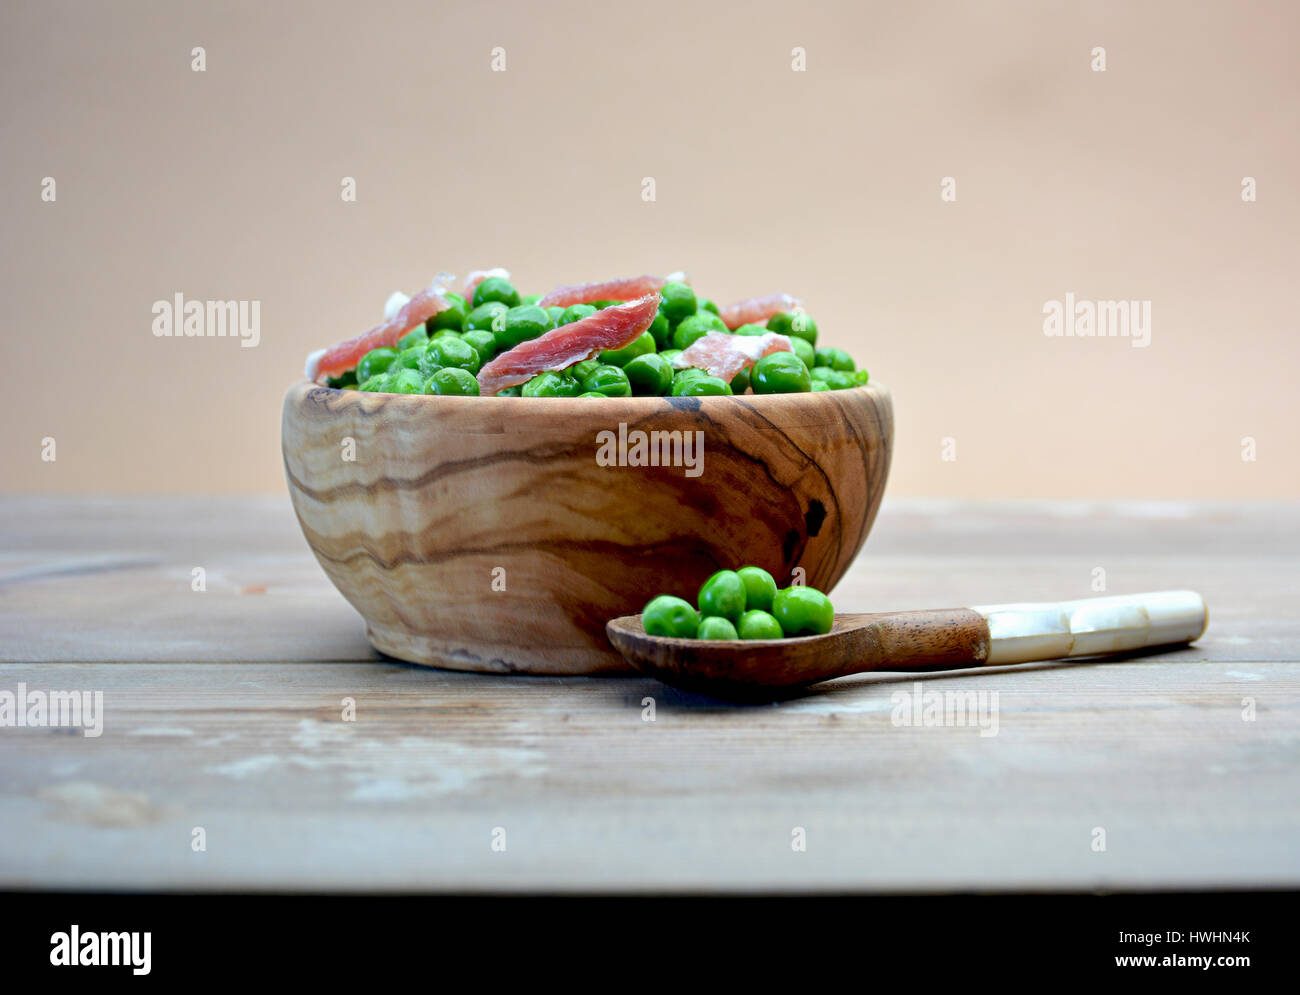 DISH OF WOOD FULL OF PEAS WITH HAM ON TABLE RUSTIC Stock Photo